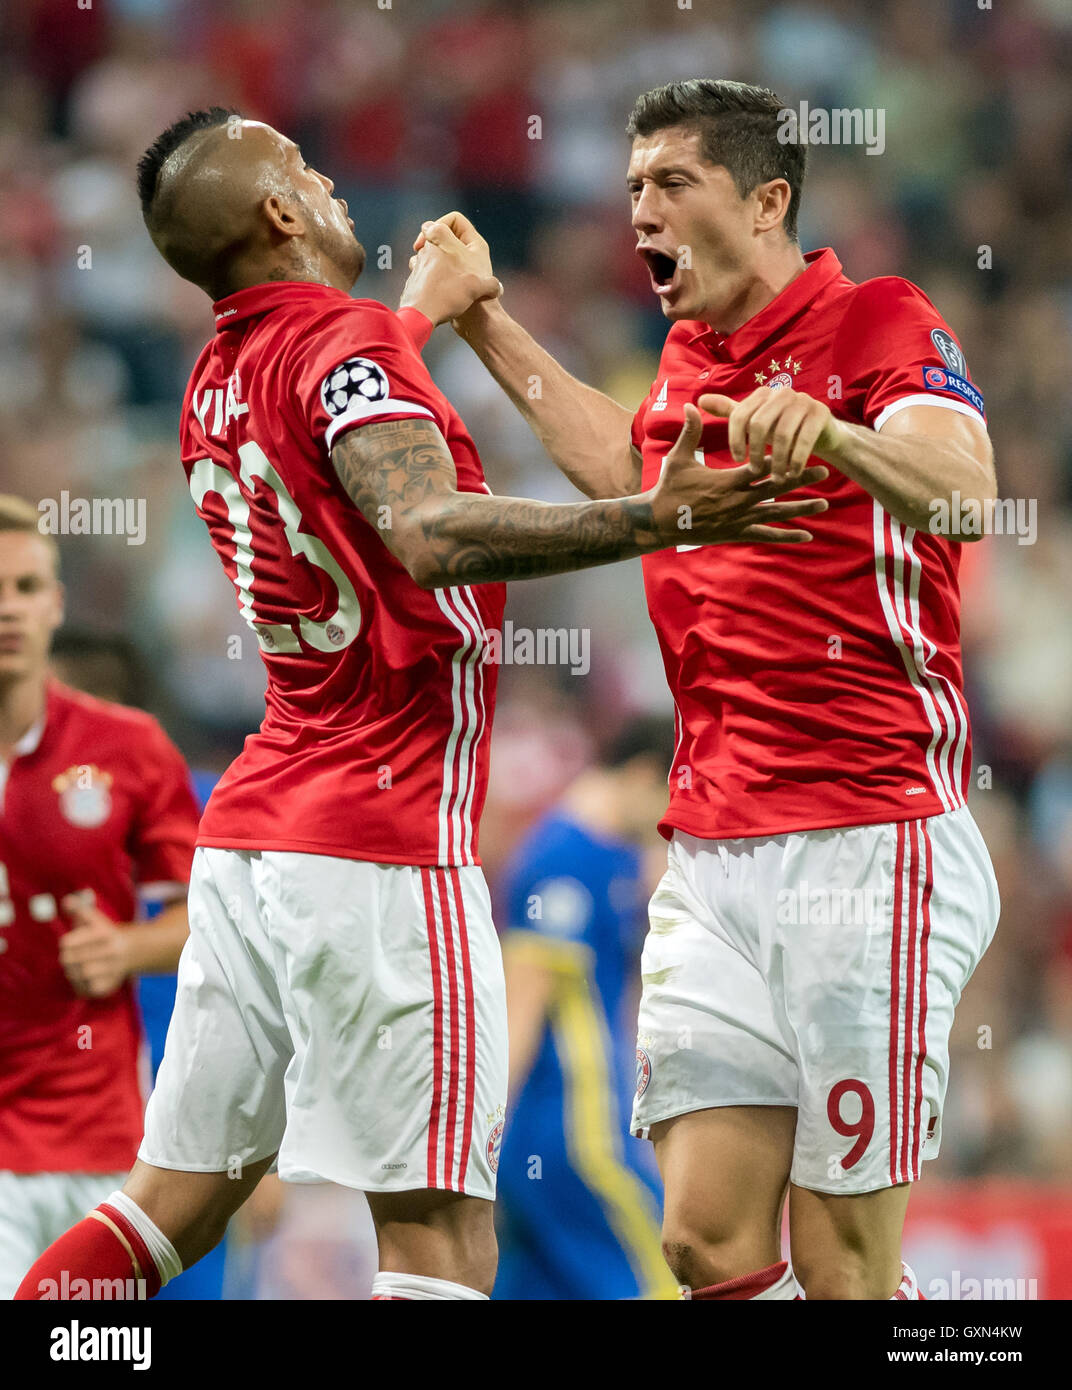 Munich, Germany. 13th Sep, 2016. Munich's Robert Lewandowski (r) cheers after his 1:0 goal Arturo Vidal in the UEFA Champions League match between FC Bavaria Munich and FK Rostow at the Allianz Arena in Munich, Germany, 13 September 2016. PHOTO: THOMAS EISENHUTH/dpa (ATTENTION: FASCIMILE TRANSMISSION ONLY AFTER CONSULTATION) - NO WIRE SERVICE - © dpa/Alamy Live News Stock Photo